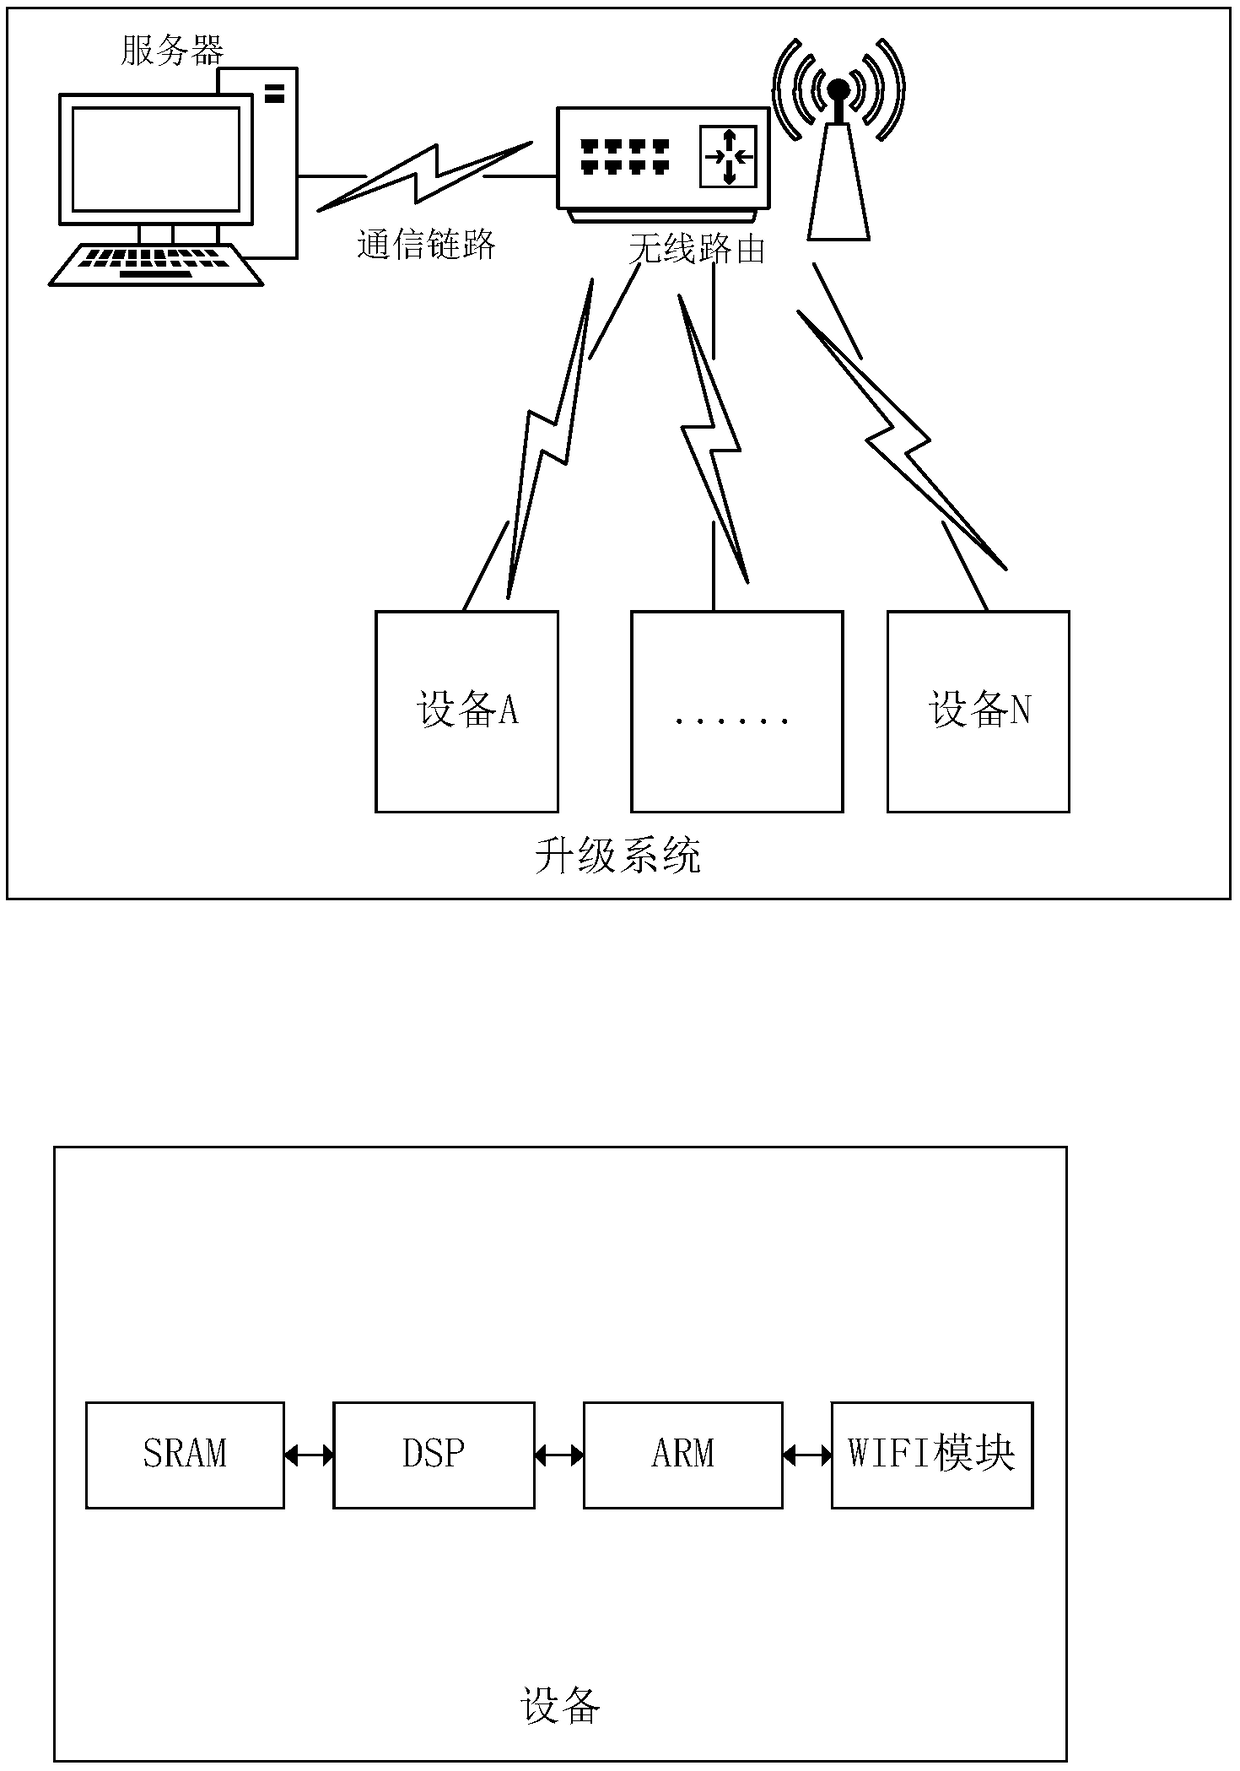 Dual-core controller online upgrading system of DSP and ARM based on WIFI and method thereof